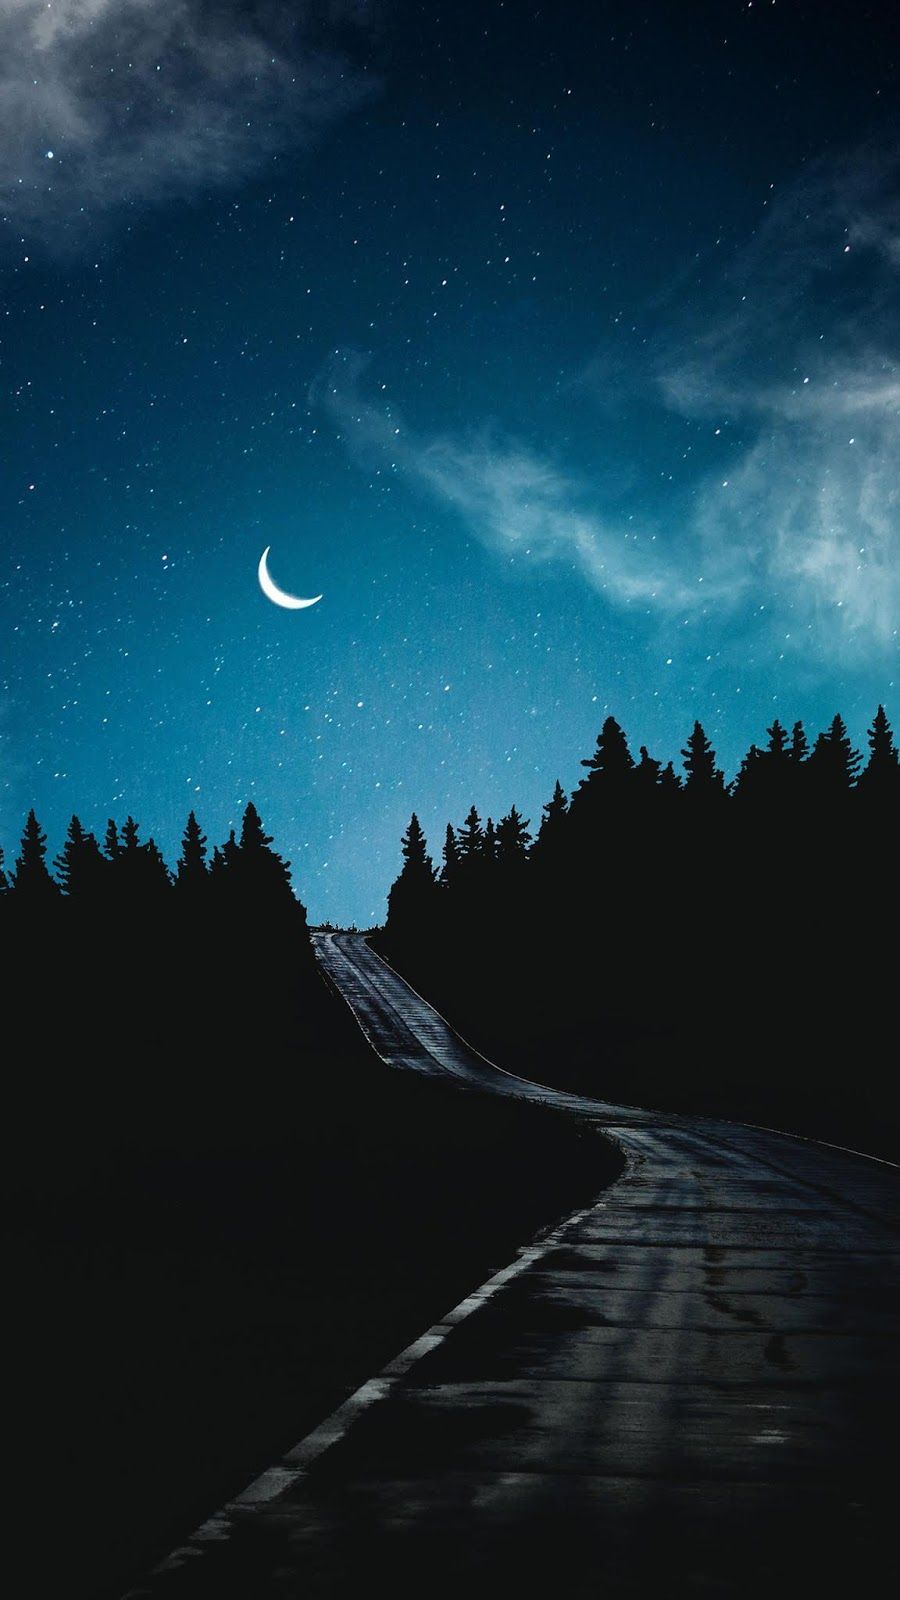 Road under crescent moon #wallpaper #iphone #android #background